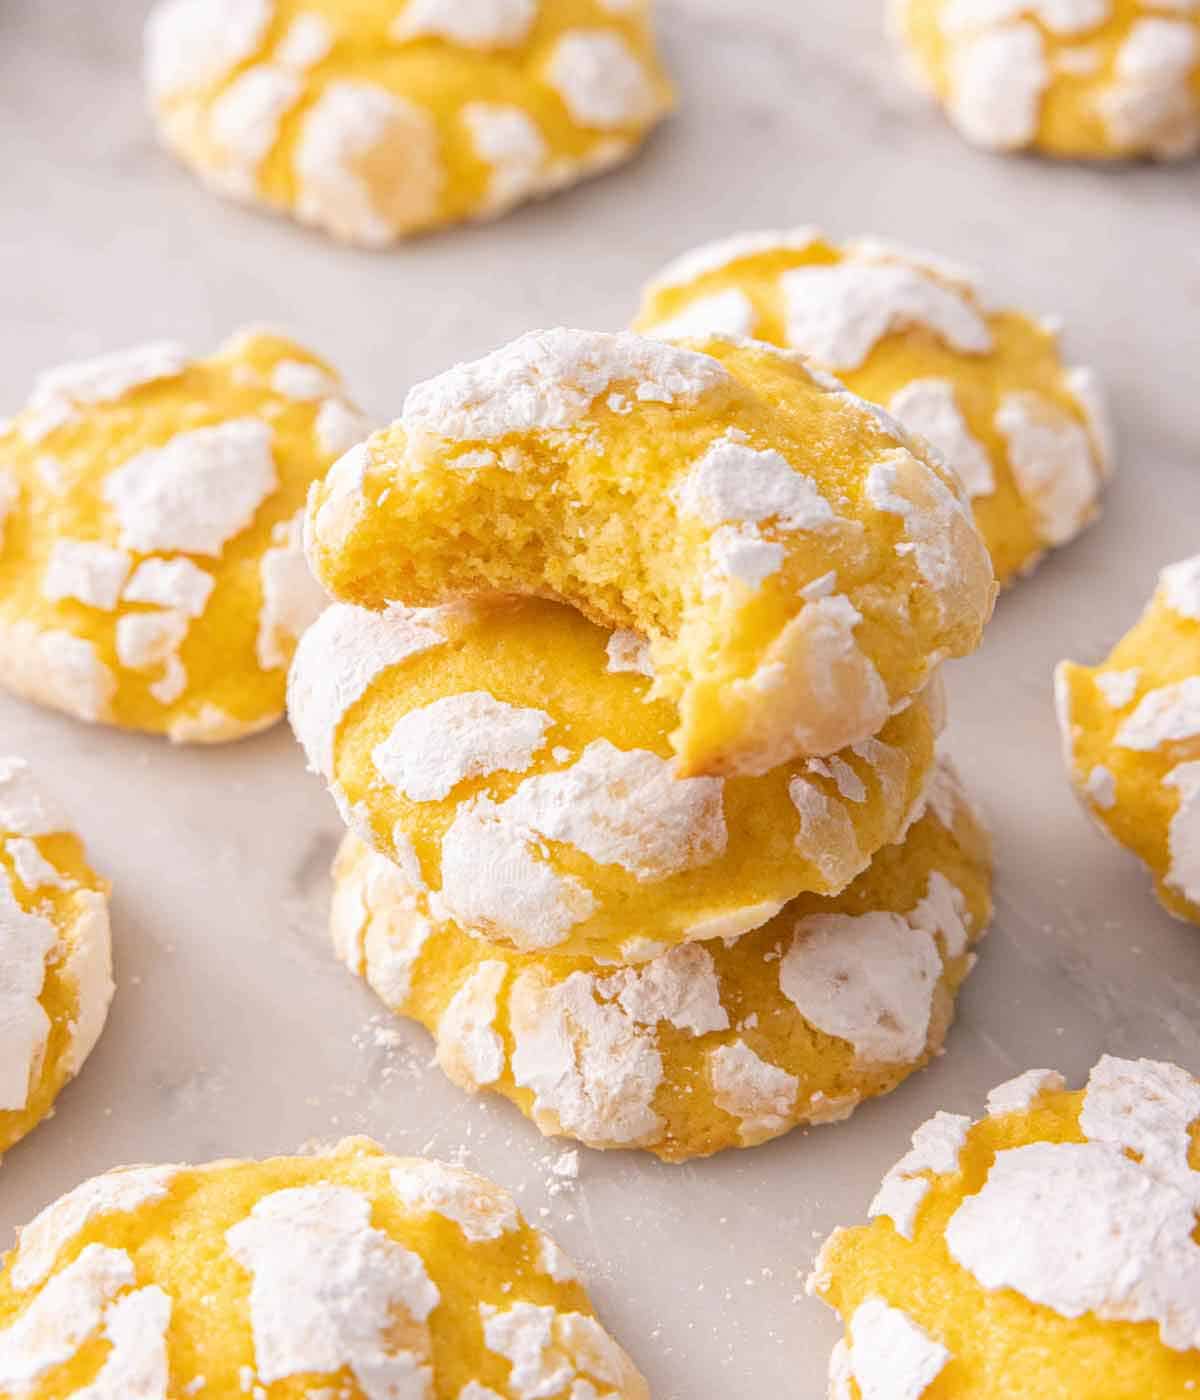 A stack of three lemon crinkle cookies with a bite taken out of the top cookie in the middle of multiple cooks scattered around.